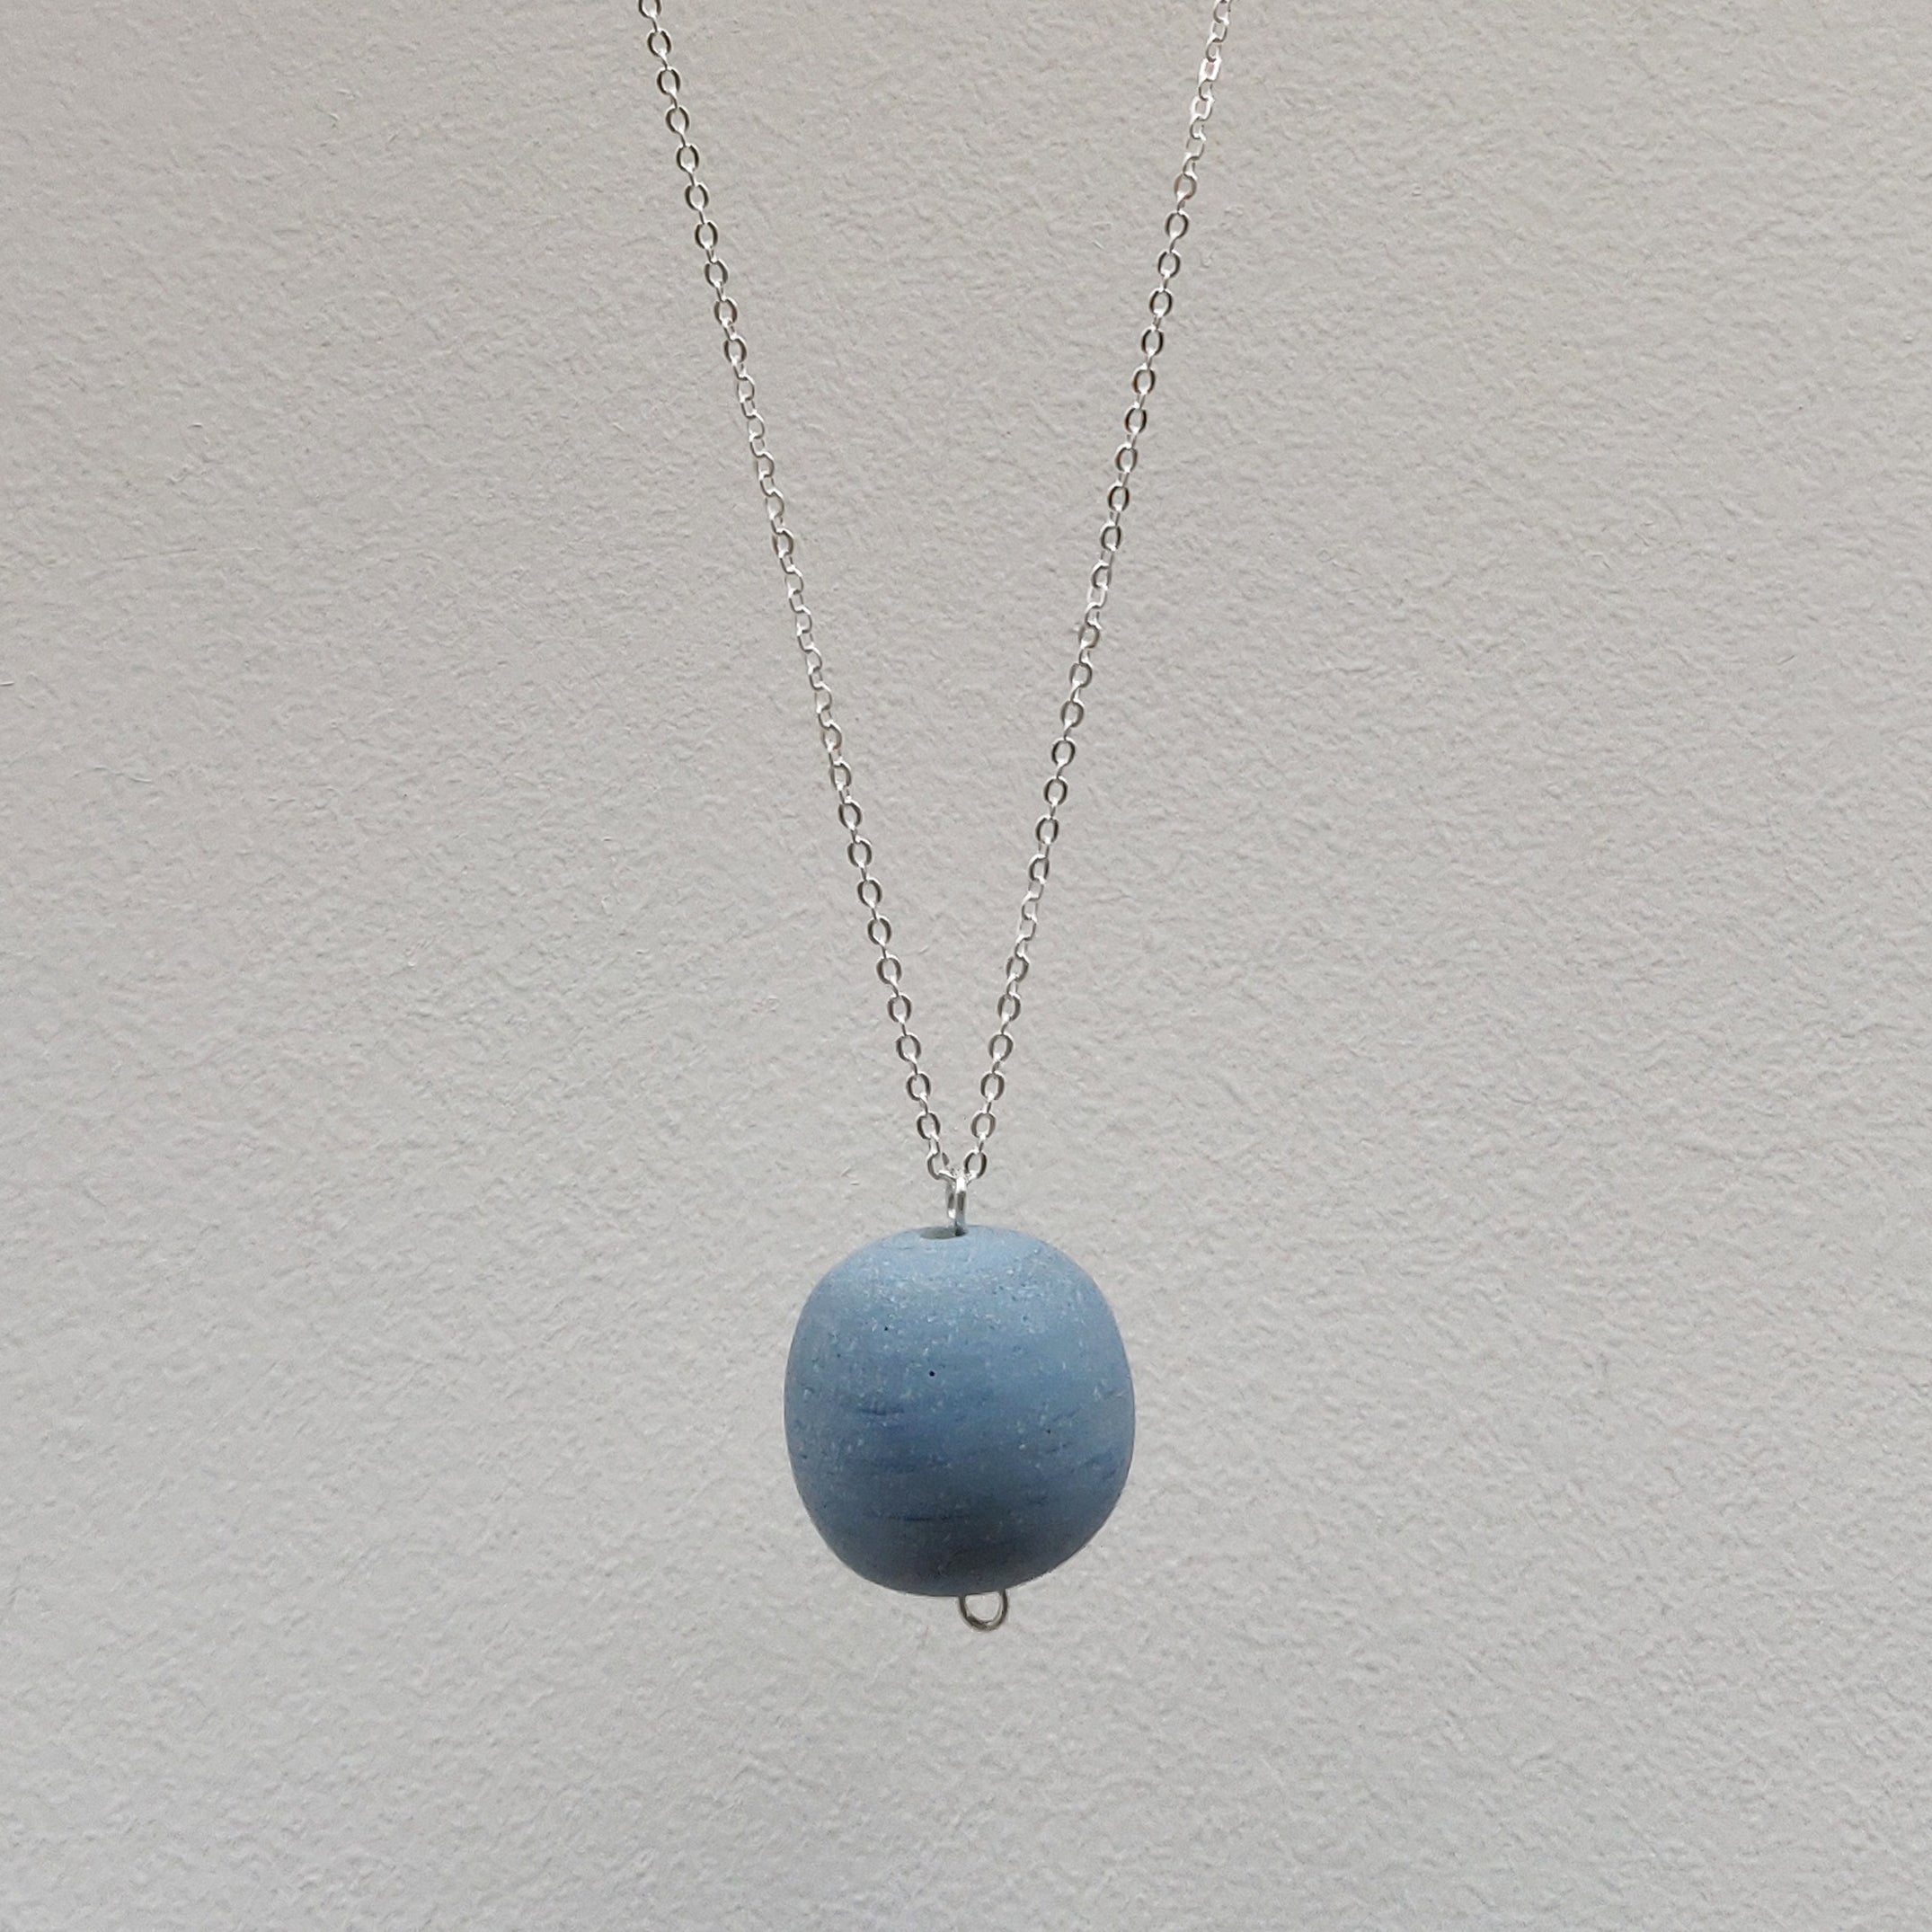 Just Trade x Kettle's Yard Pebble Pendant Necklace